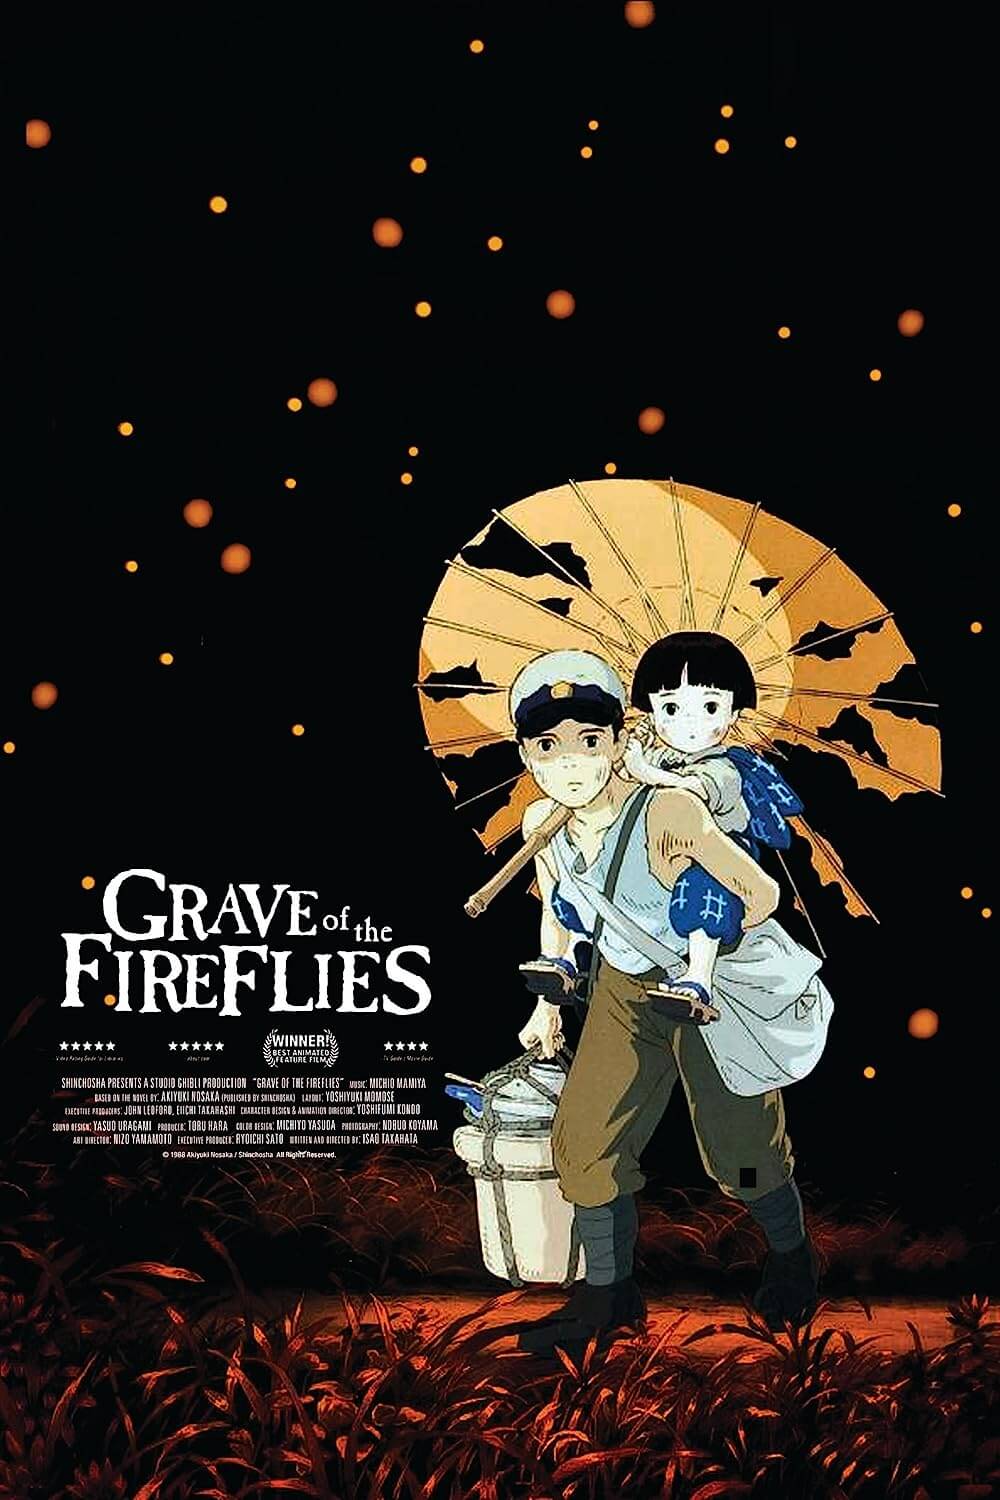 Watch Grave of the Fireflies today, it's one of the best Studio Ghibli movies for teenagers and adults (15+ year olds).